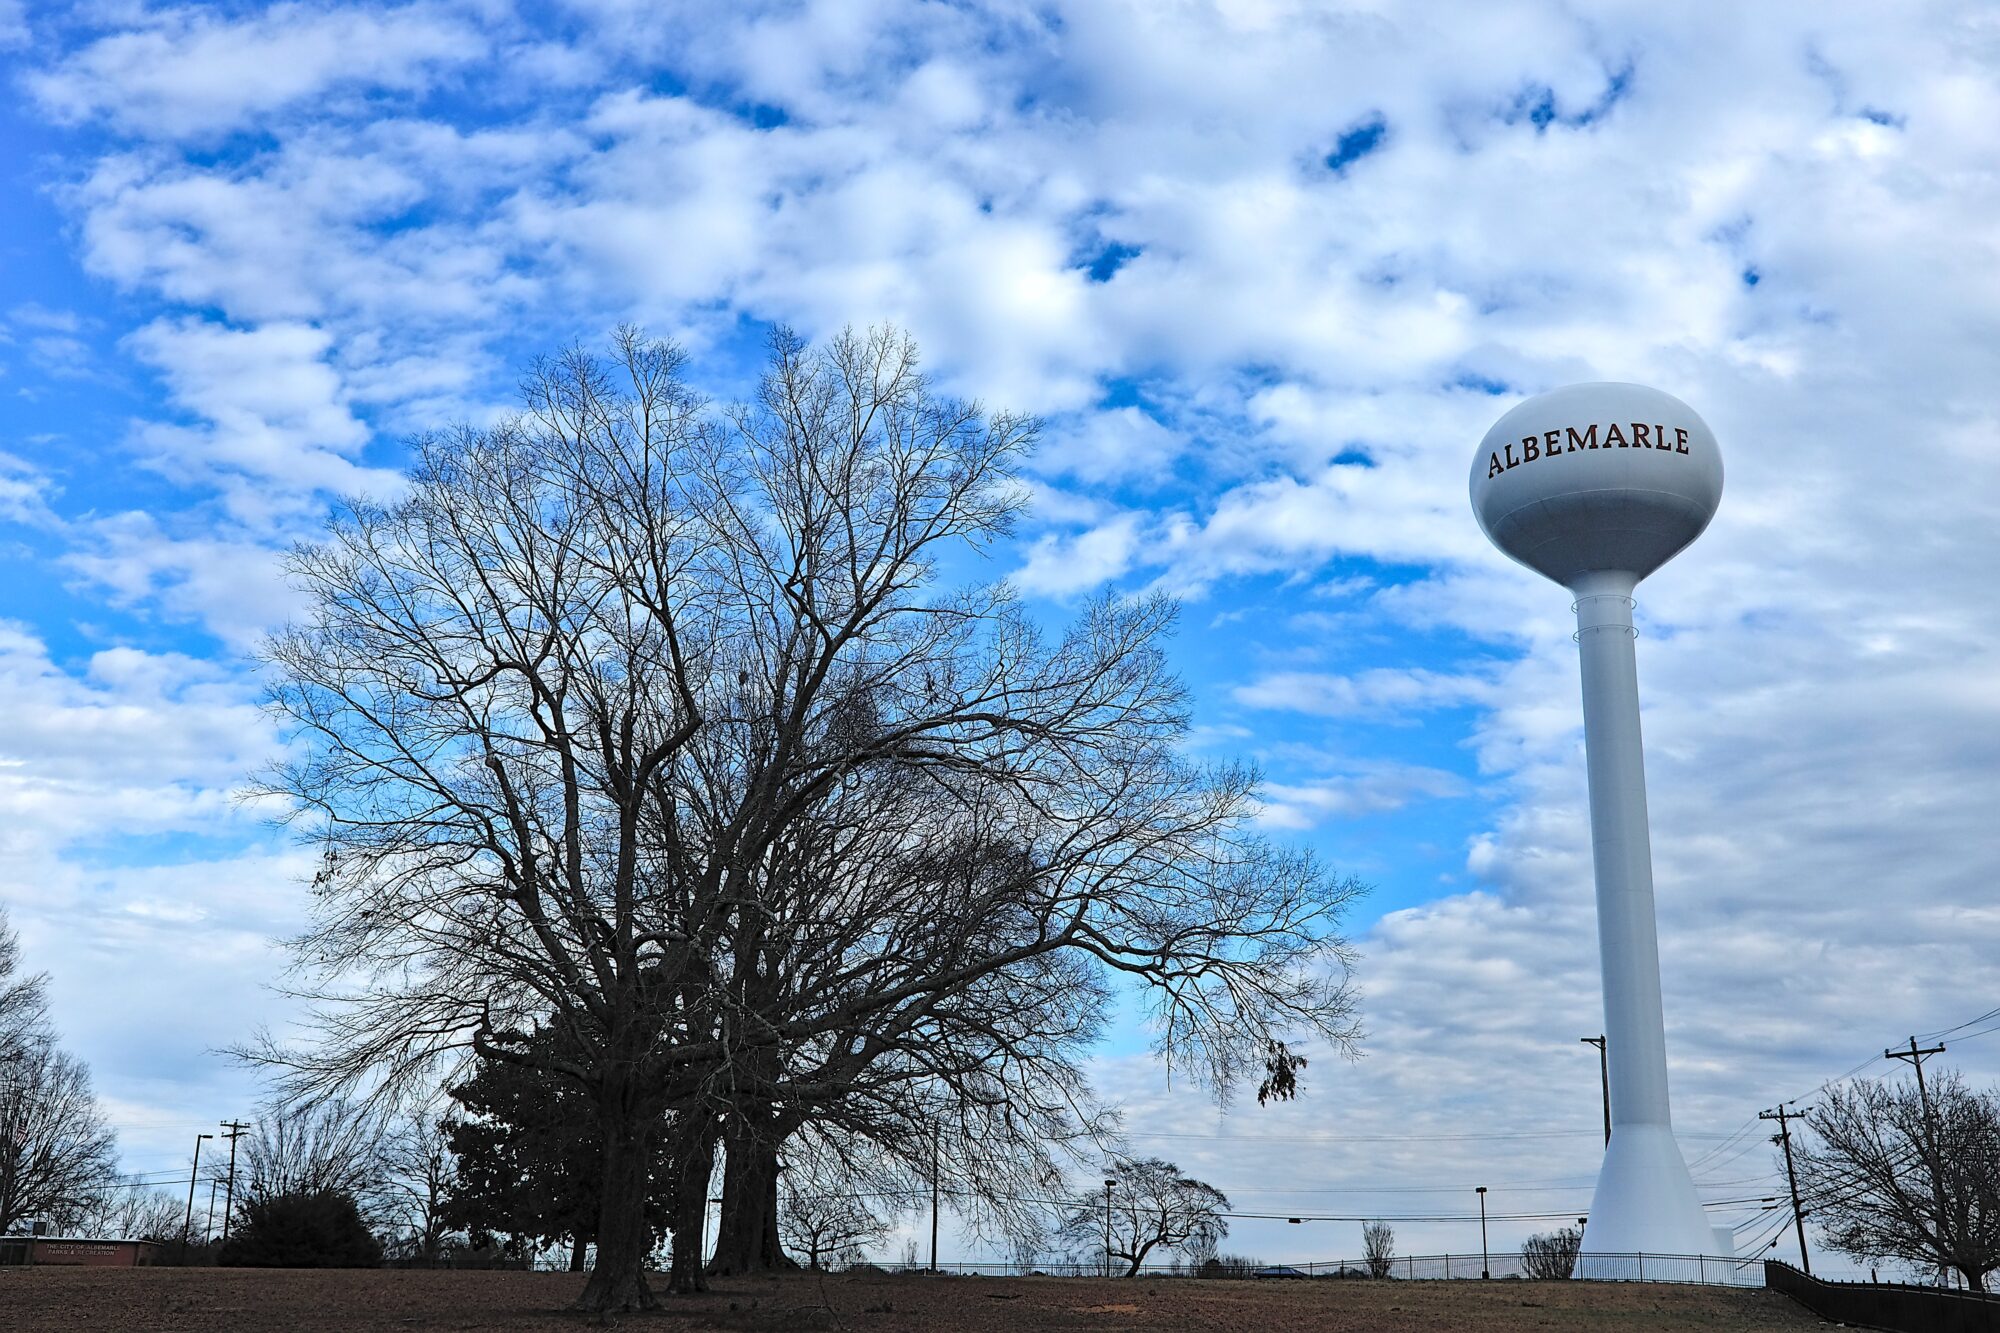 A water tower that reads "Albemarle"